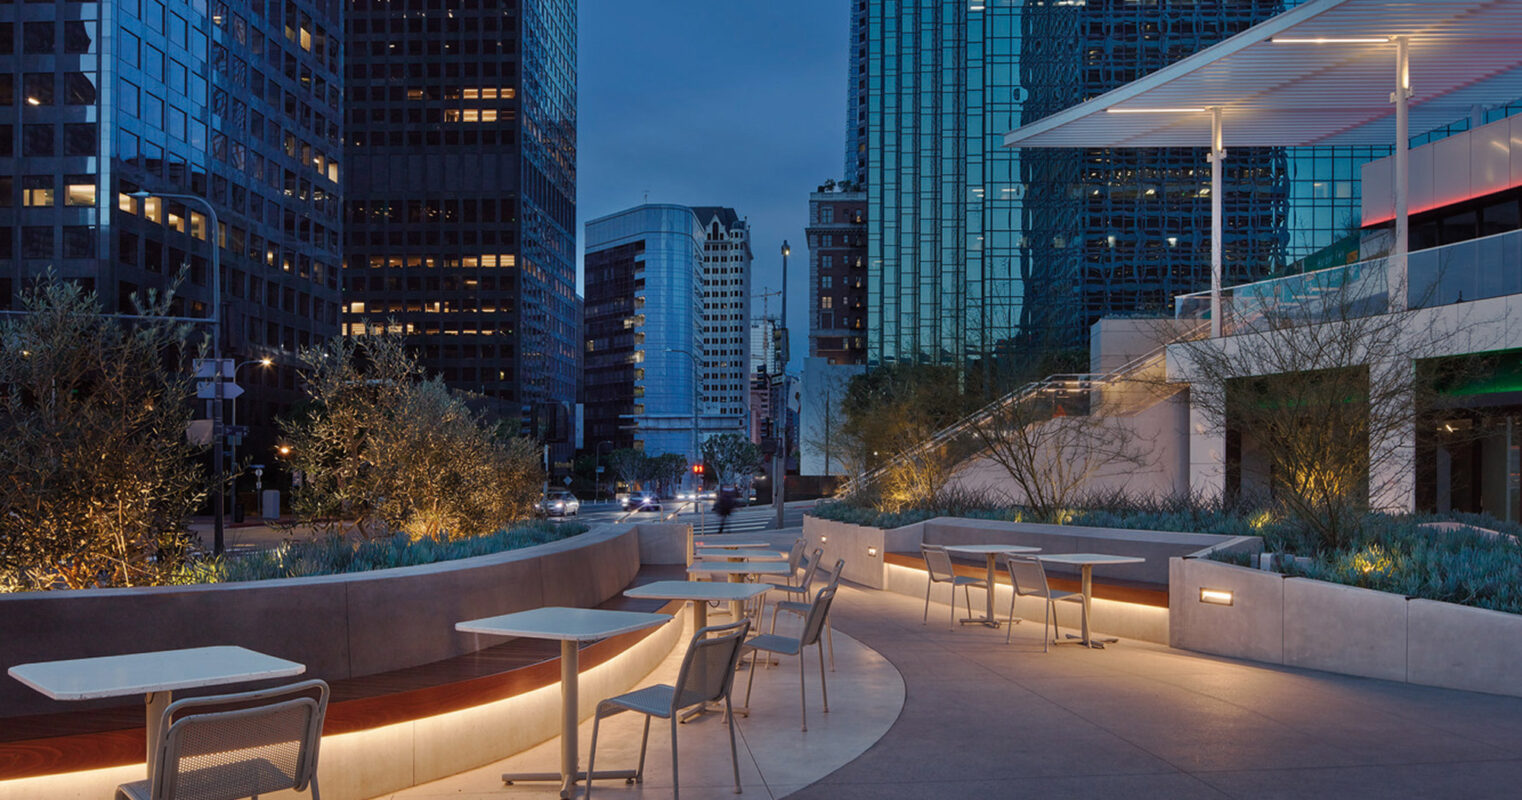 Modern urban rooftop terrace with sleek, curved benches and minimalist white tables. Soft lighting accentuates the understated elegance amidst the high-rise backdrop at twilight.